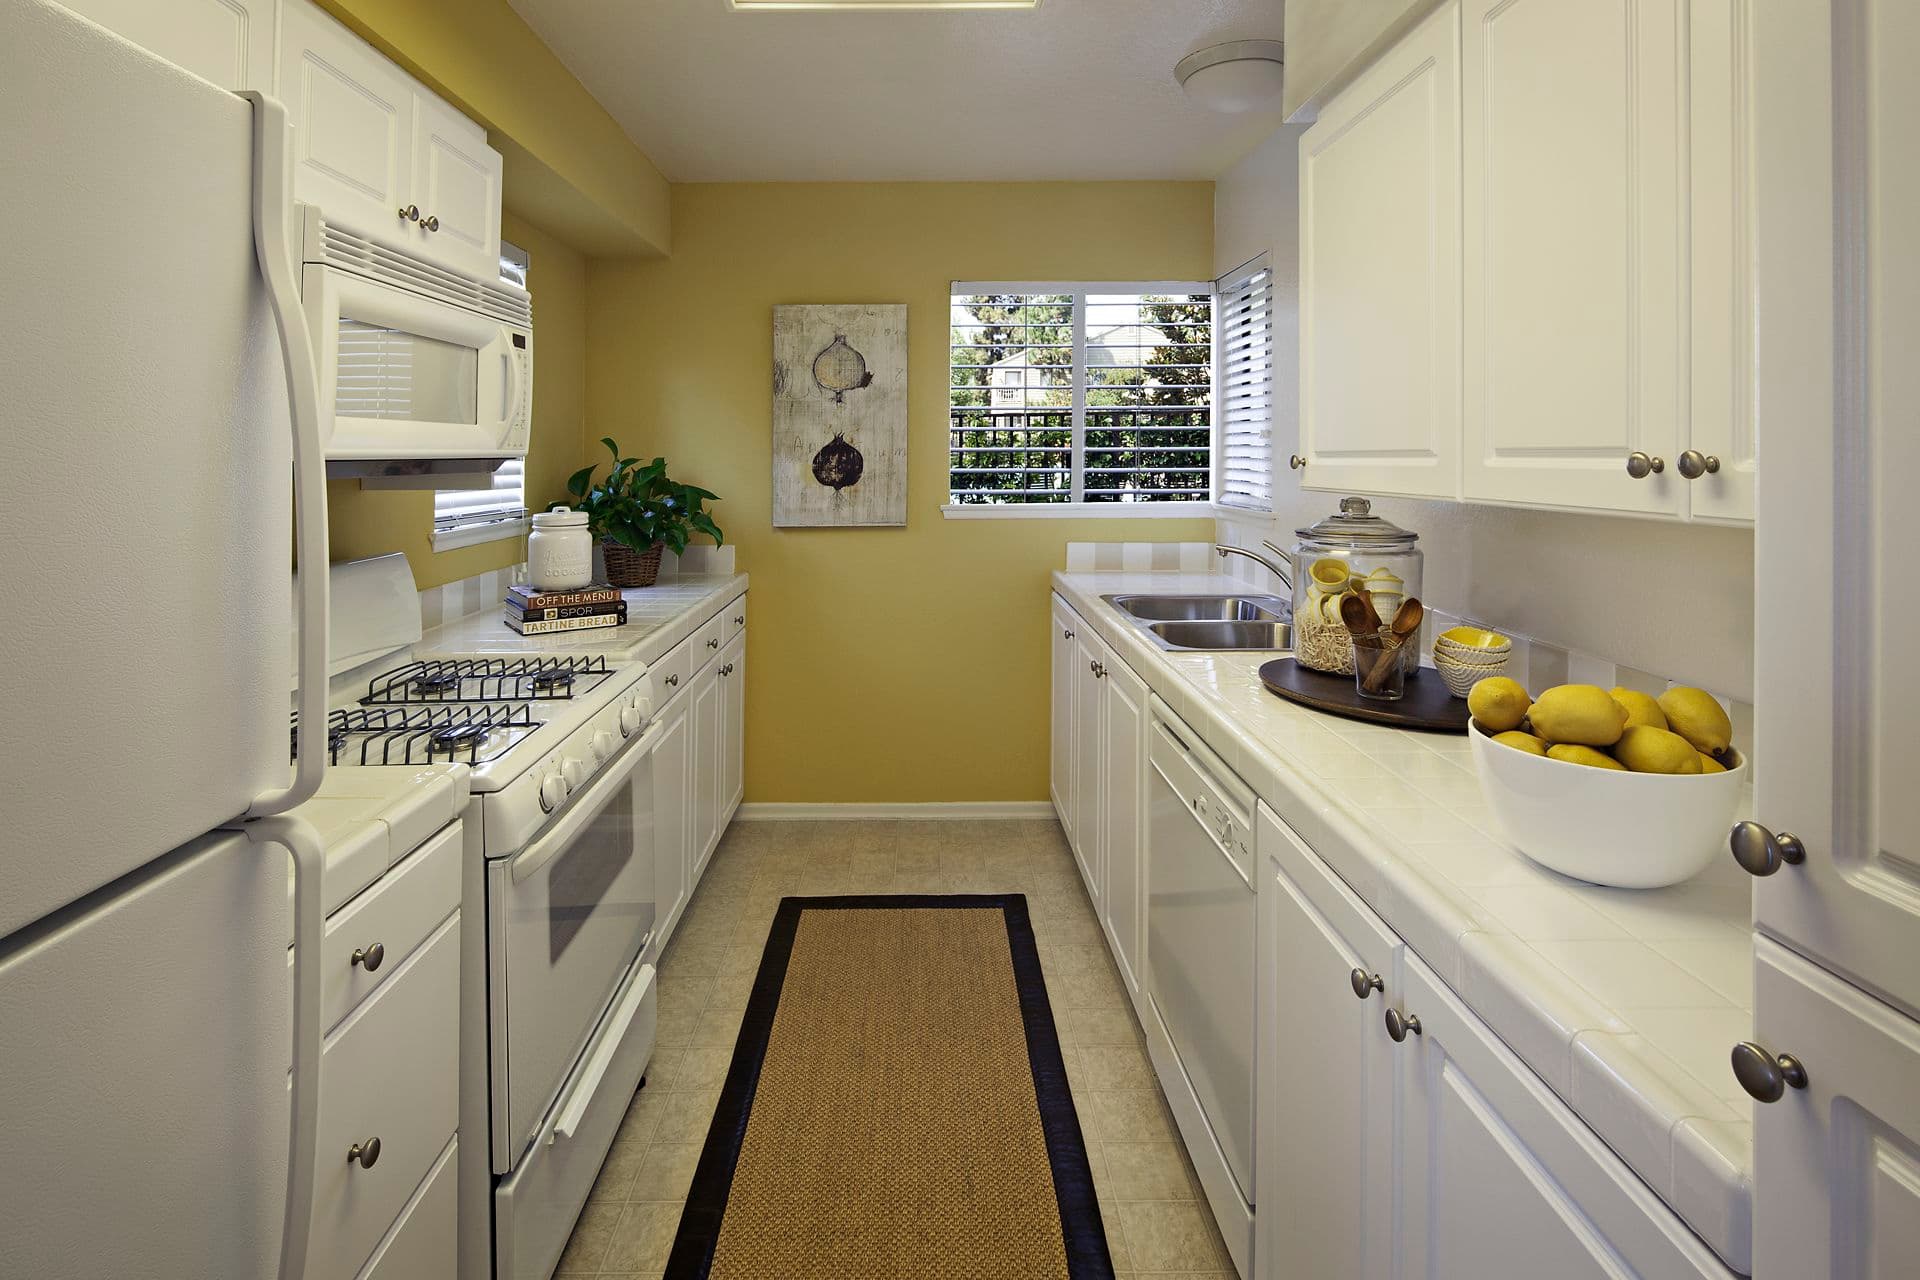 Interior view of kitchen at Windwood Knoll Apartment Homes in Irvine, CA.